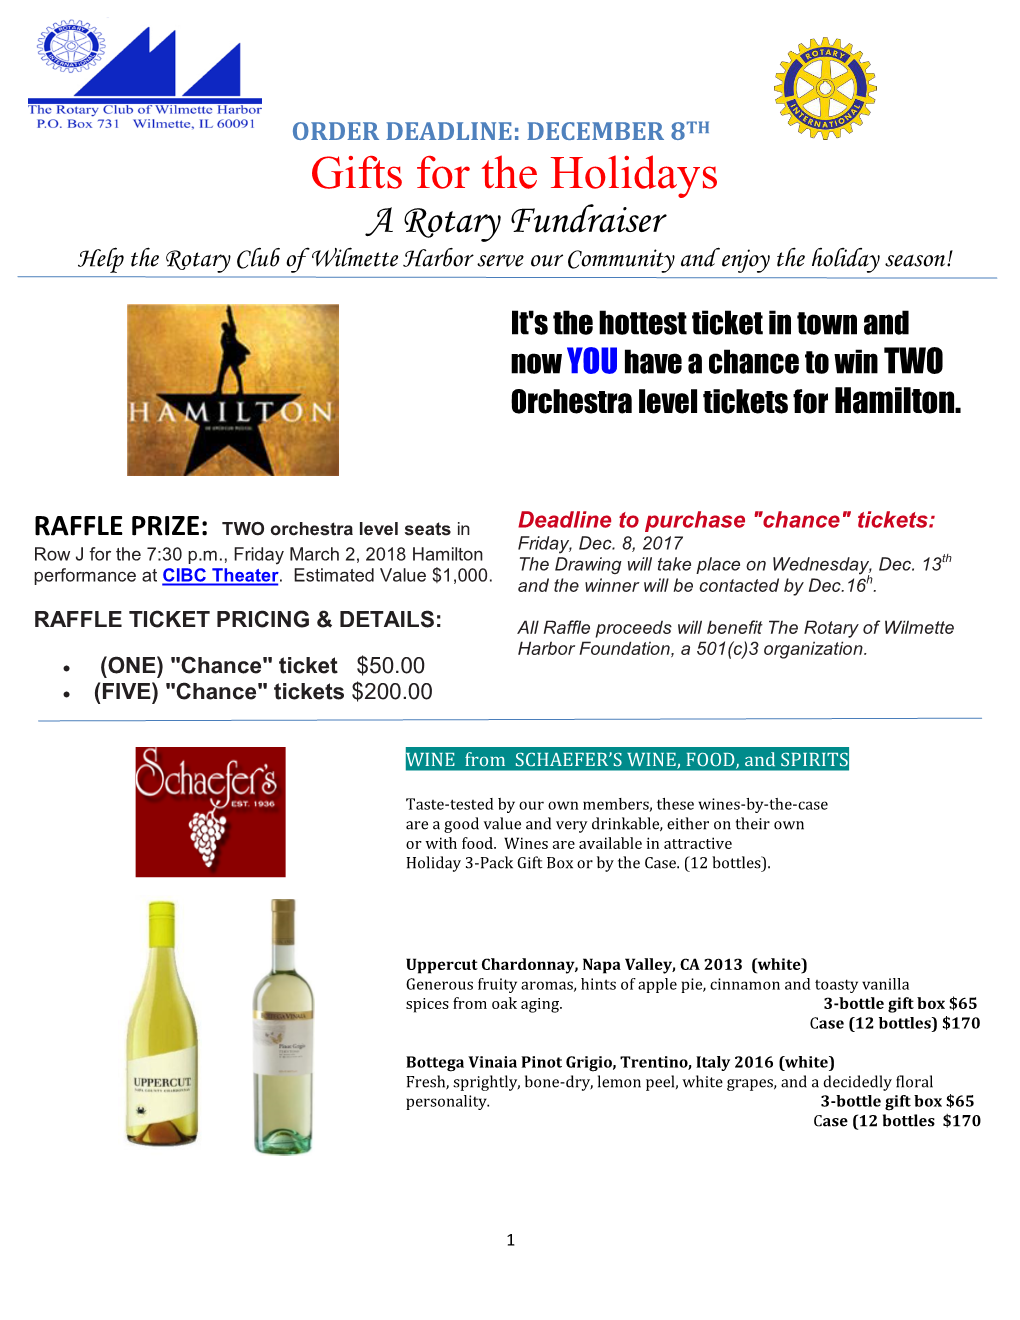 Gifts for the Holidays a Rotary Fundraiser Help the Rotary Club of Wilmette Harbor Serve Our Community and Enjoy the Holiday Season!